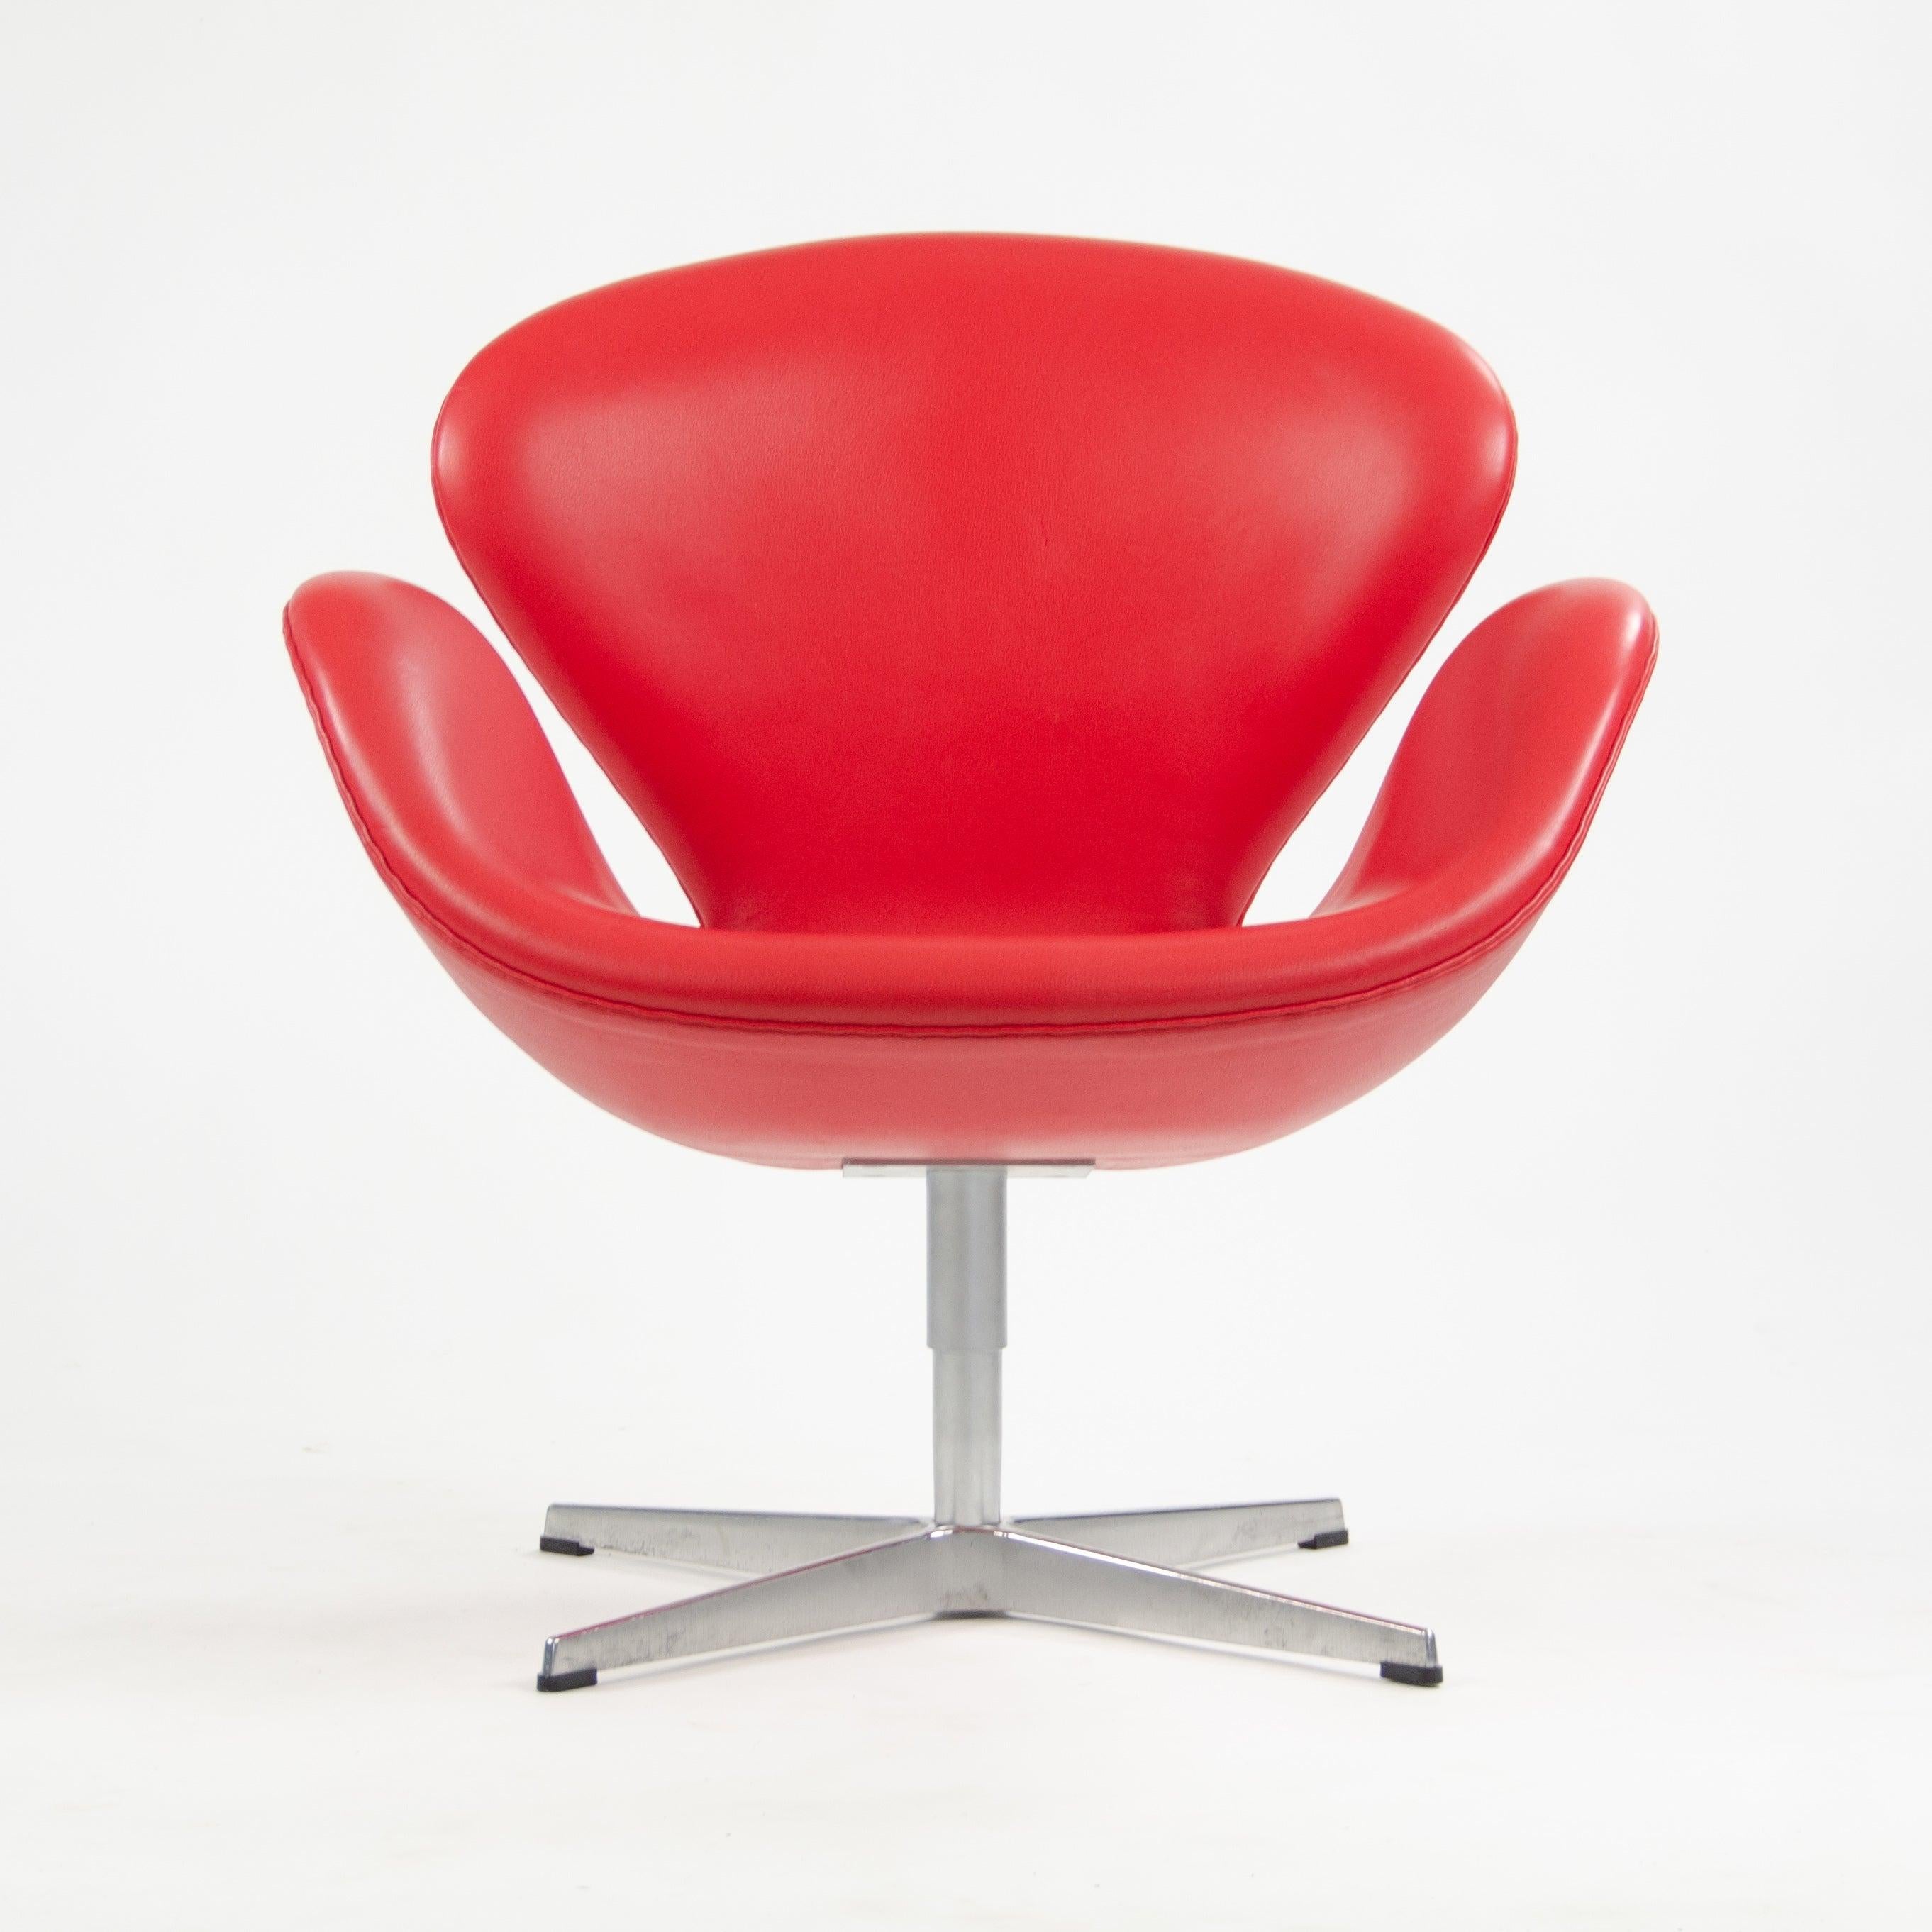 Listed for sale are four (sold separately) recent production Arne Jacobsen swan chairs, produced by Fritz Hansen in 2012.

The chairs are in terrific original condition! See photos for reference.

The chairs have a beautiful red leather upholstery